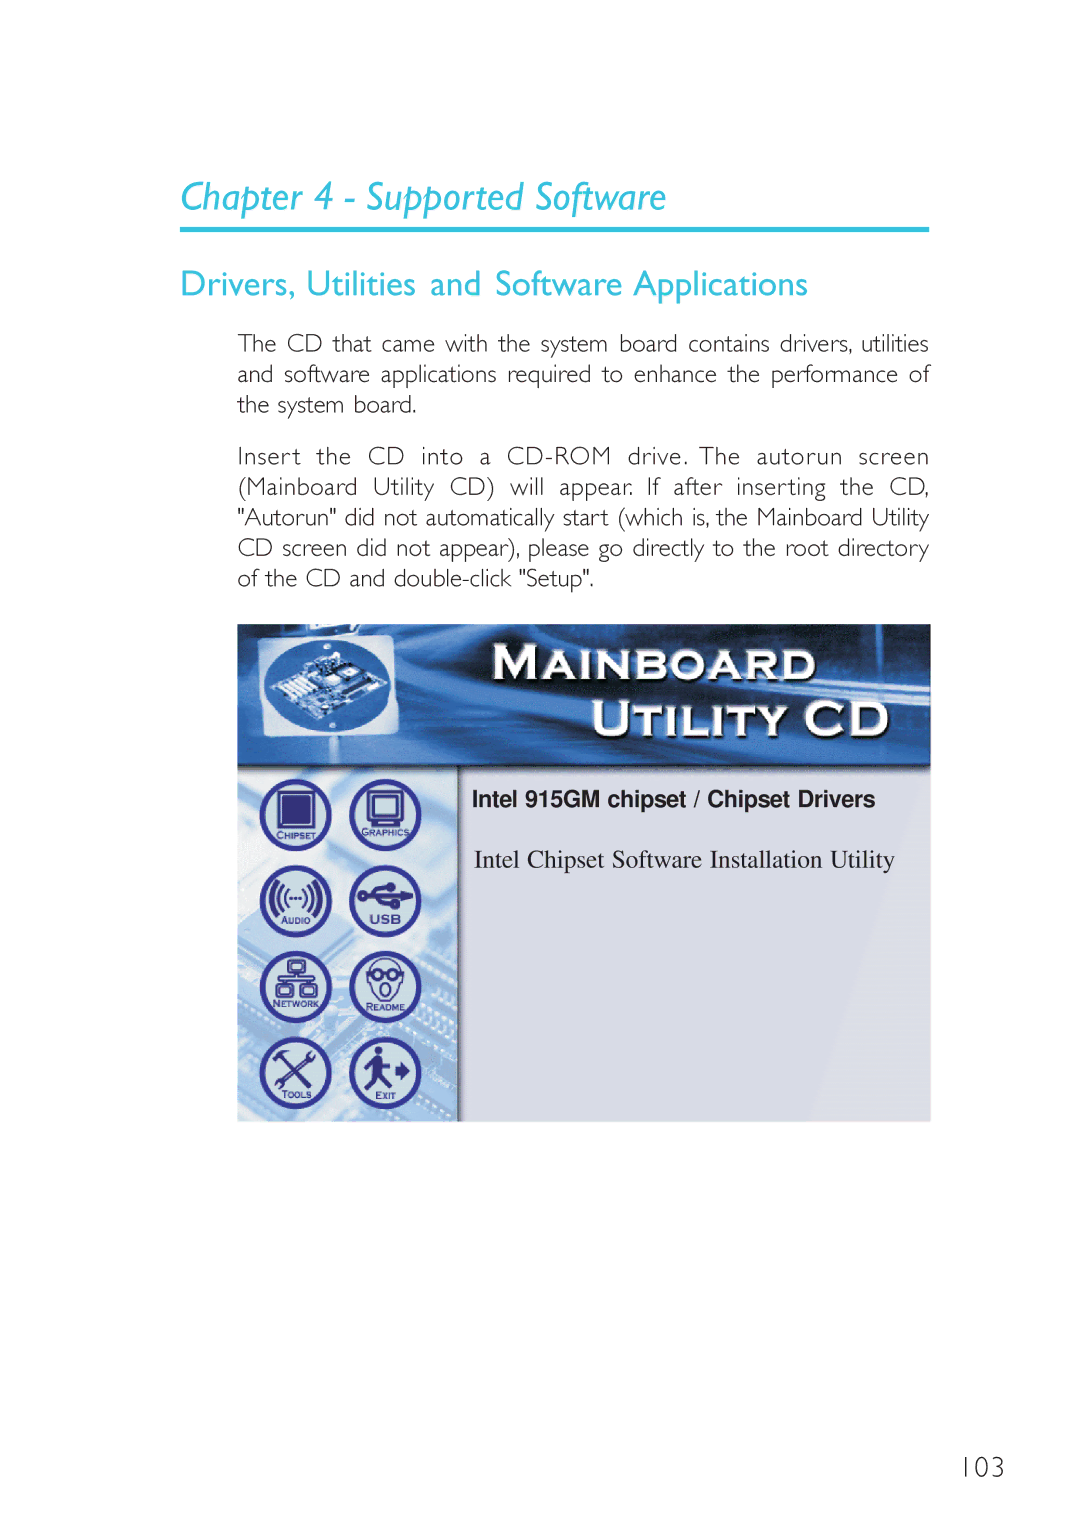 DFI 915GM-MIGF user manual Drivers, Utilities and Software Applications, Supported Software 